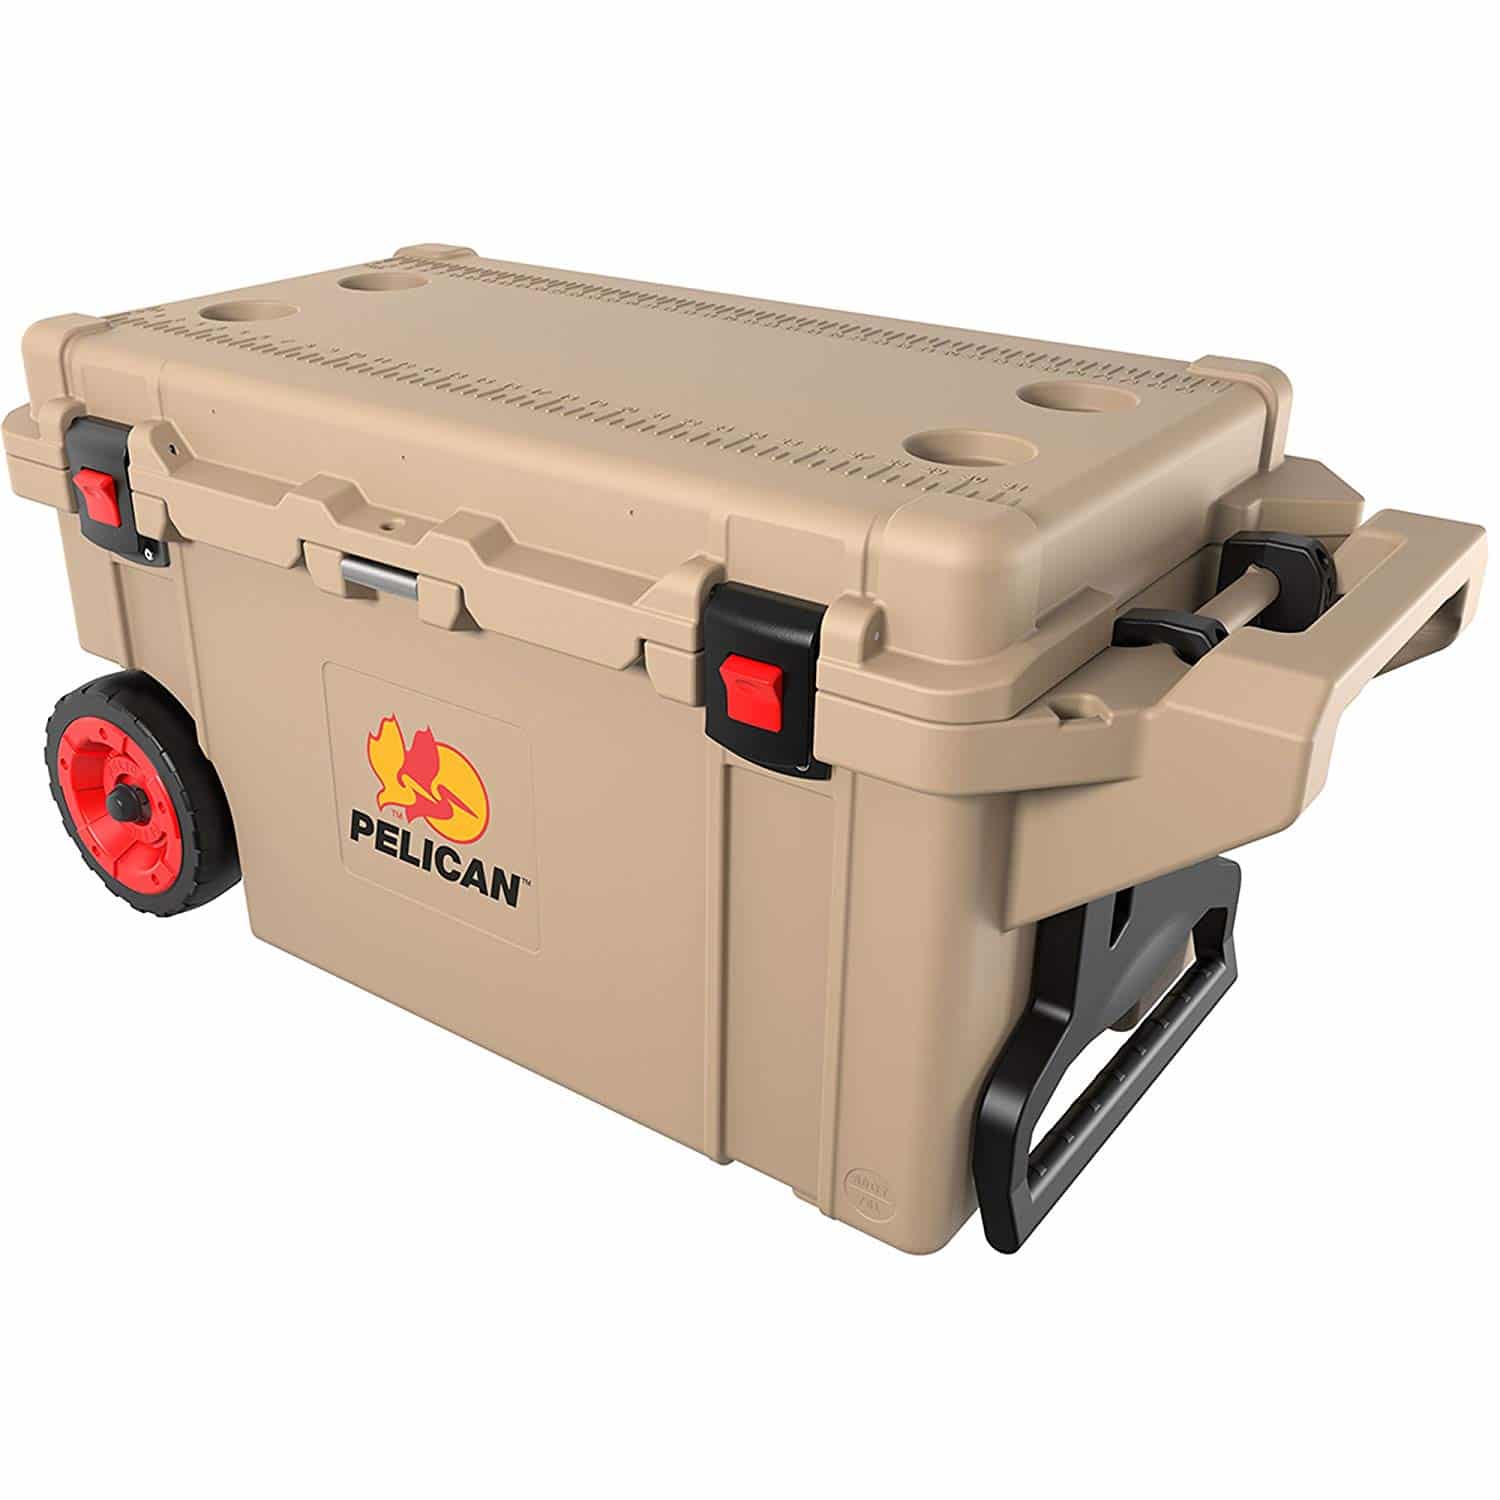 Top 10 Best Large Cooler with Wheels and Handle in 2021 Reviews